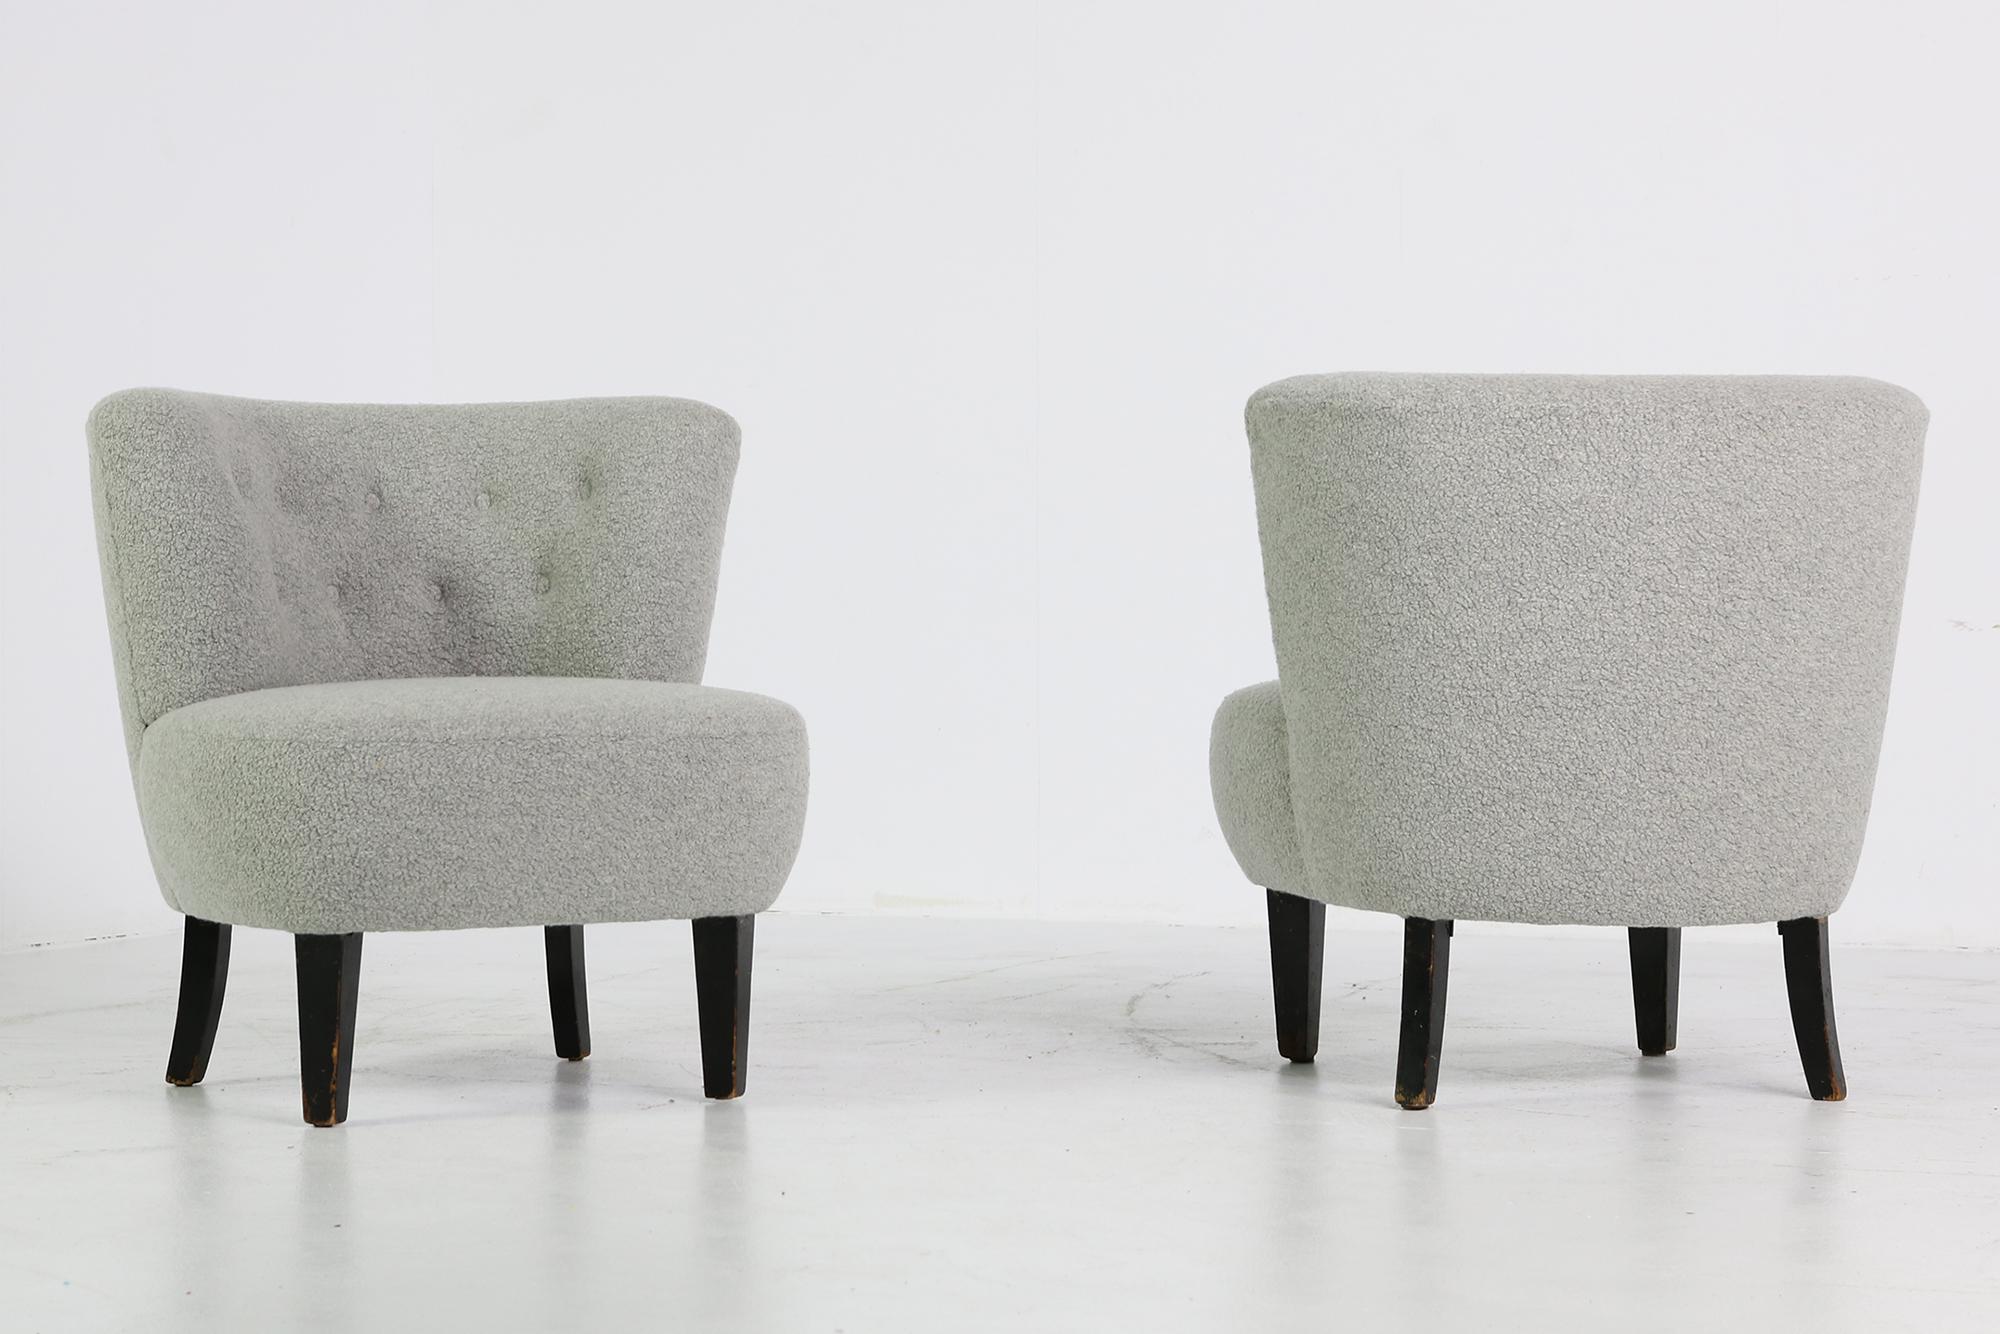 Faux Fur Pair of Curved Mid-Century Lounge Clam Chairs, Sweden 1950s, Boucle Fur, grey